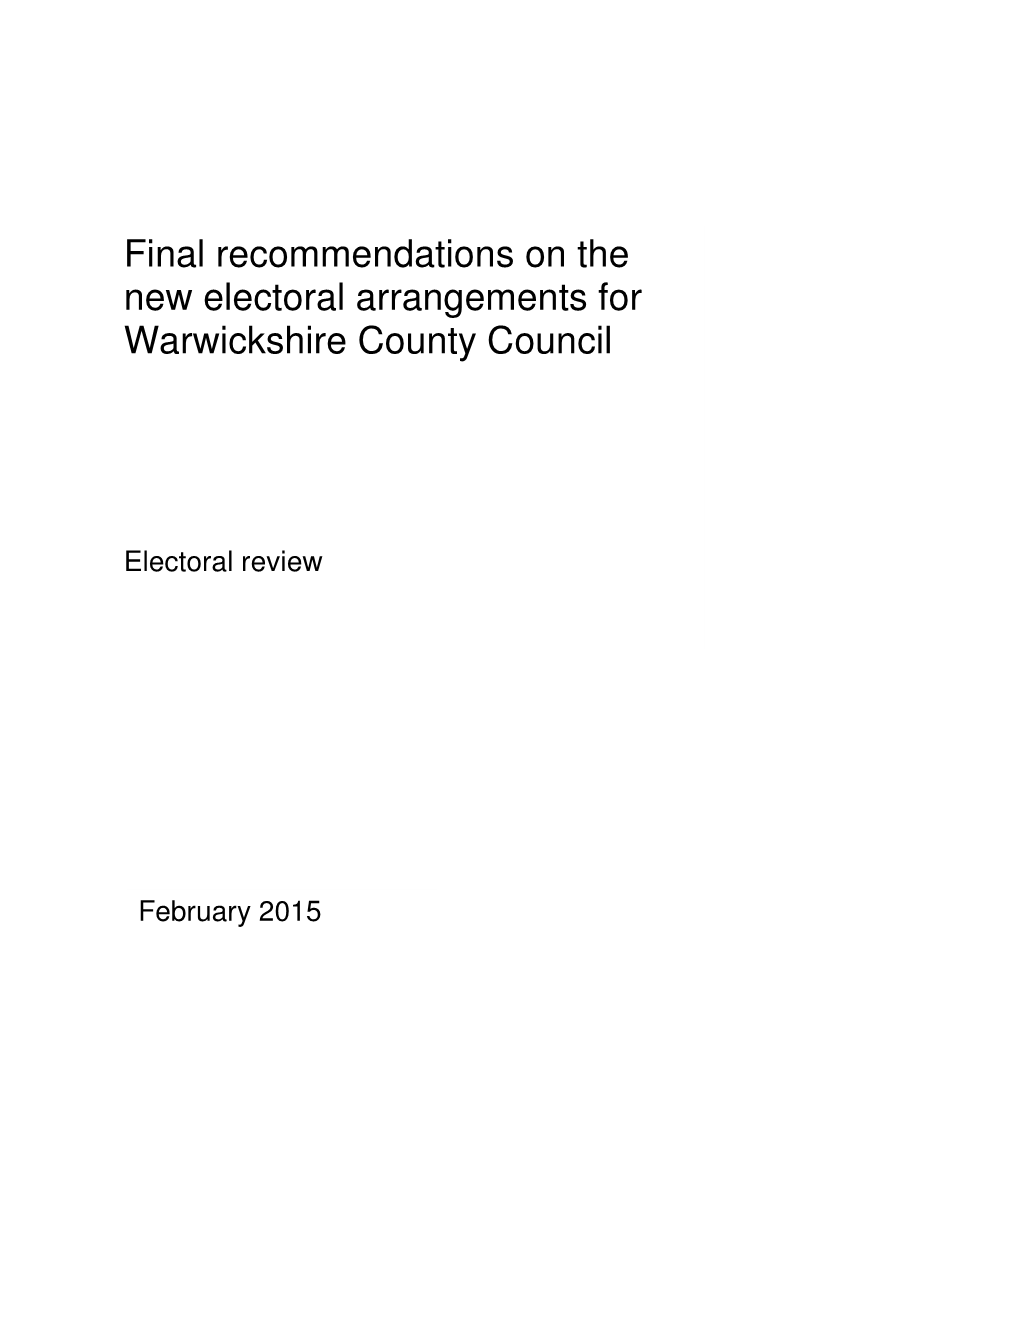 Final Recommendations on the New Electoral Arrangements for Warwickshire County Council